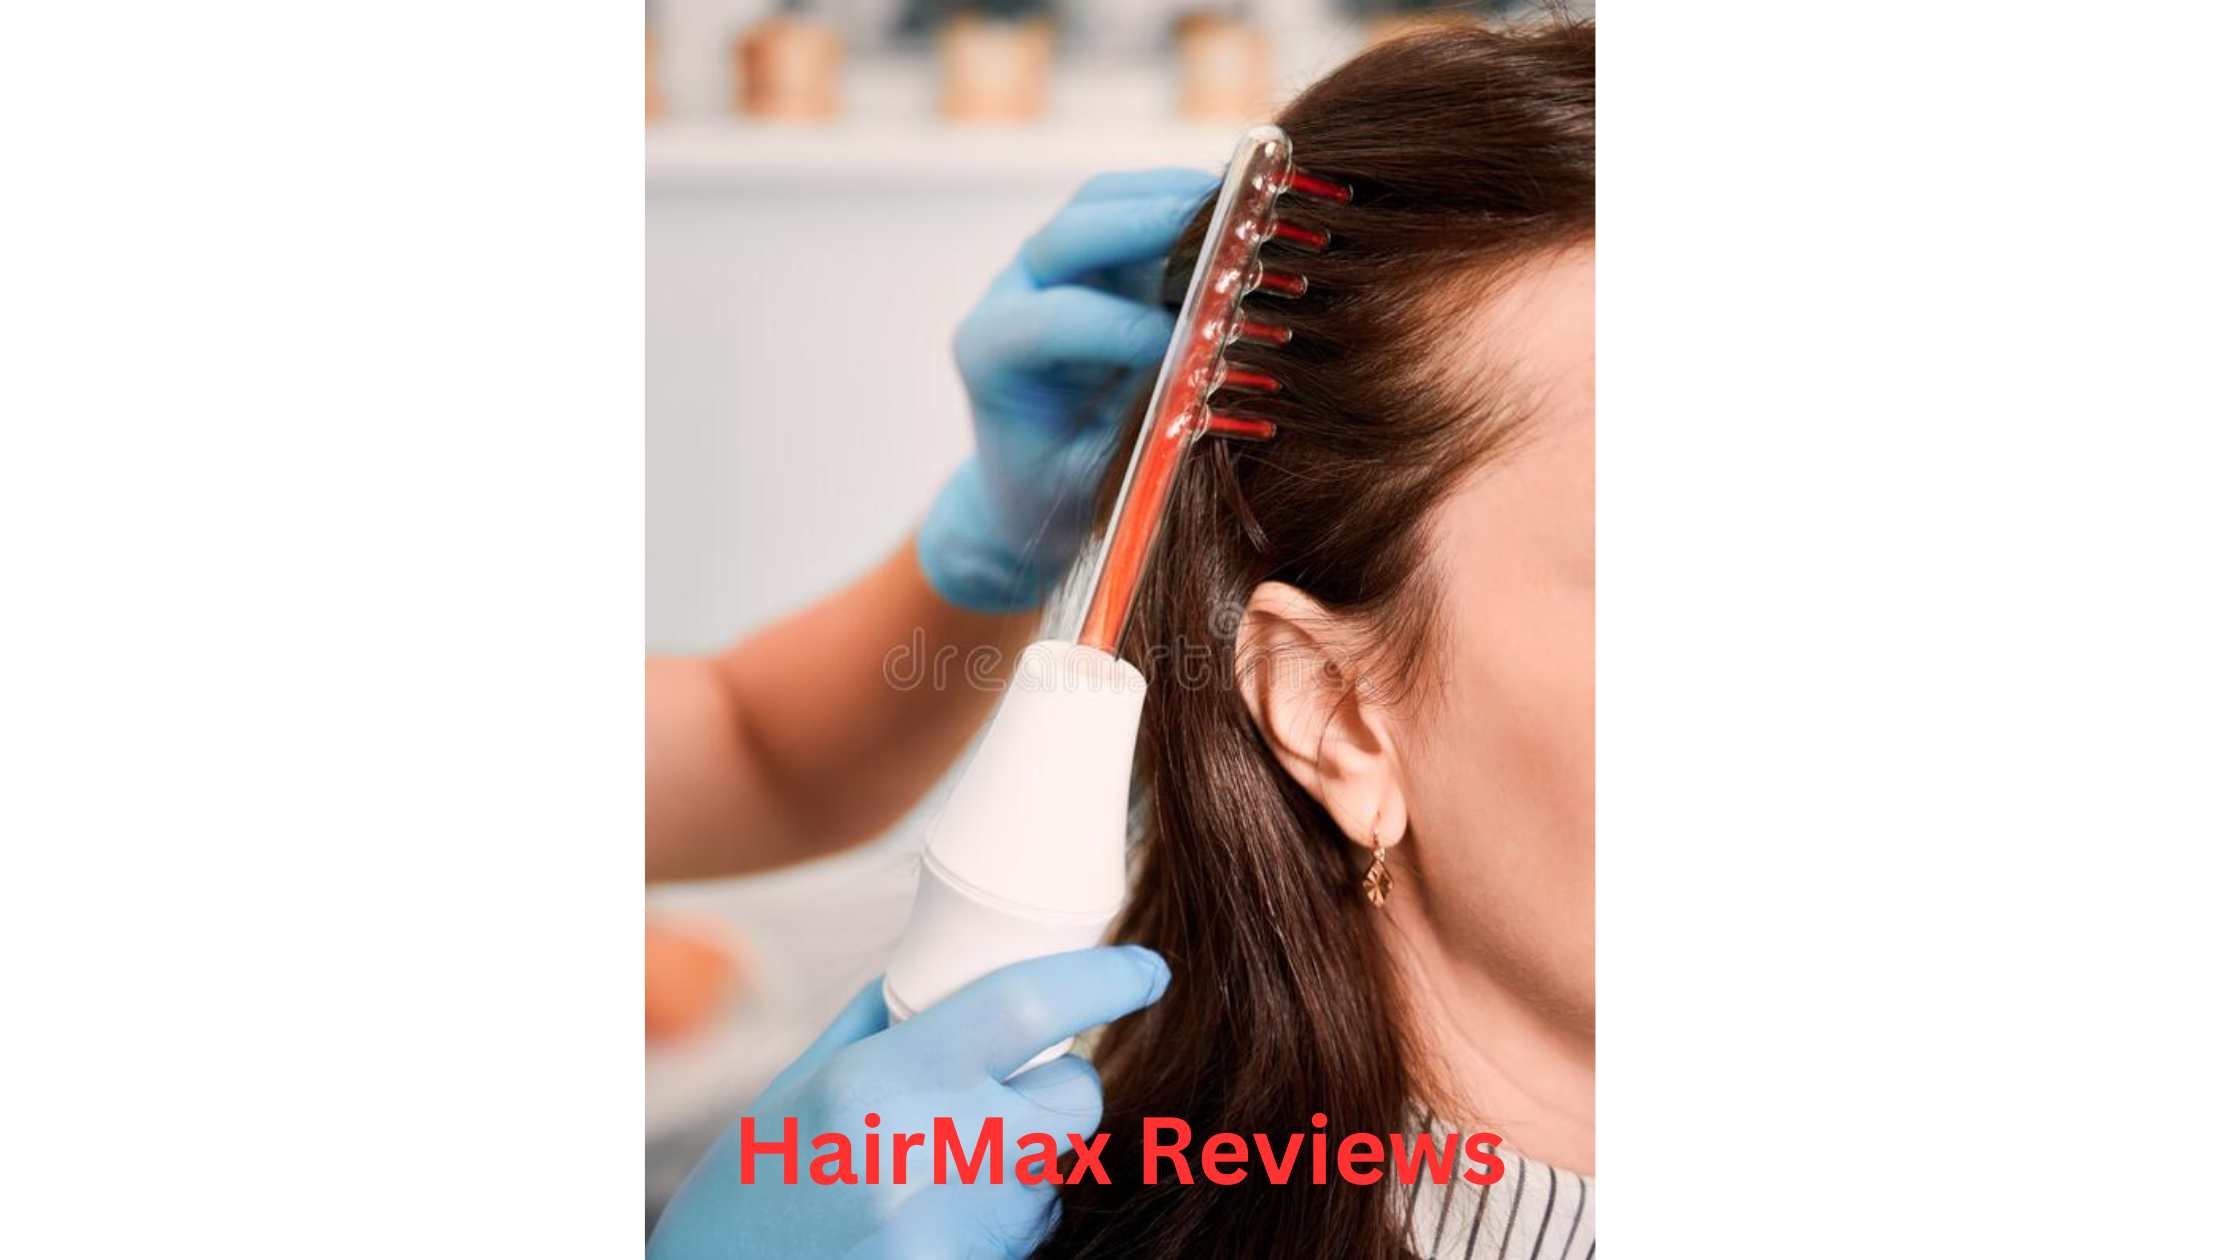 HairMax LaserComb Promises Results - Here Is HairMax Reviews